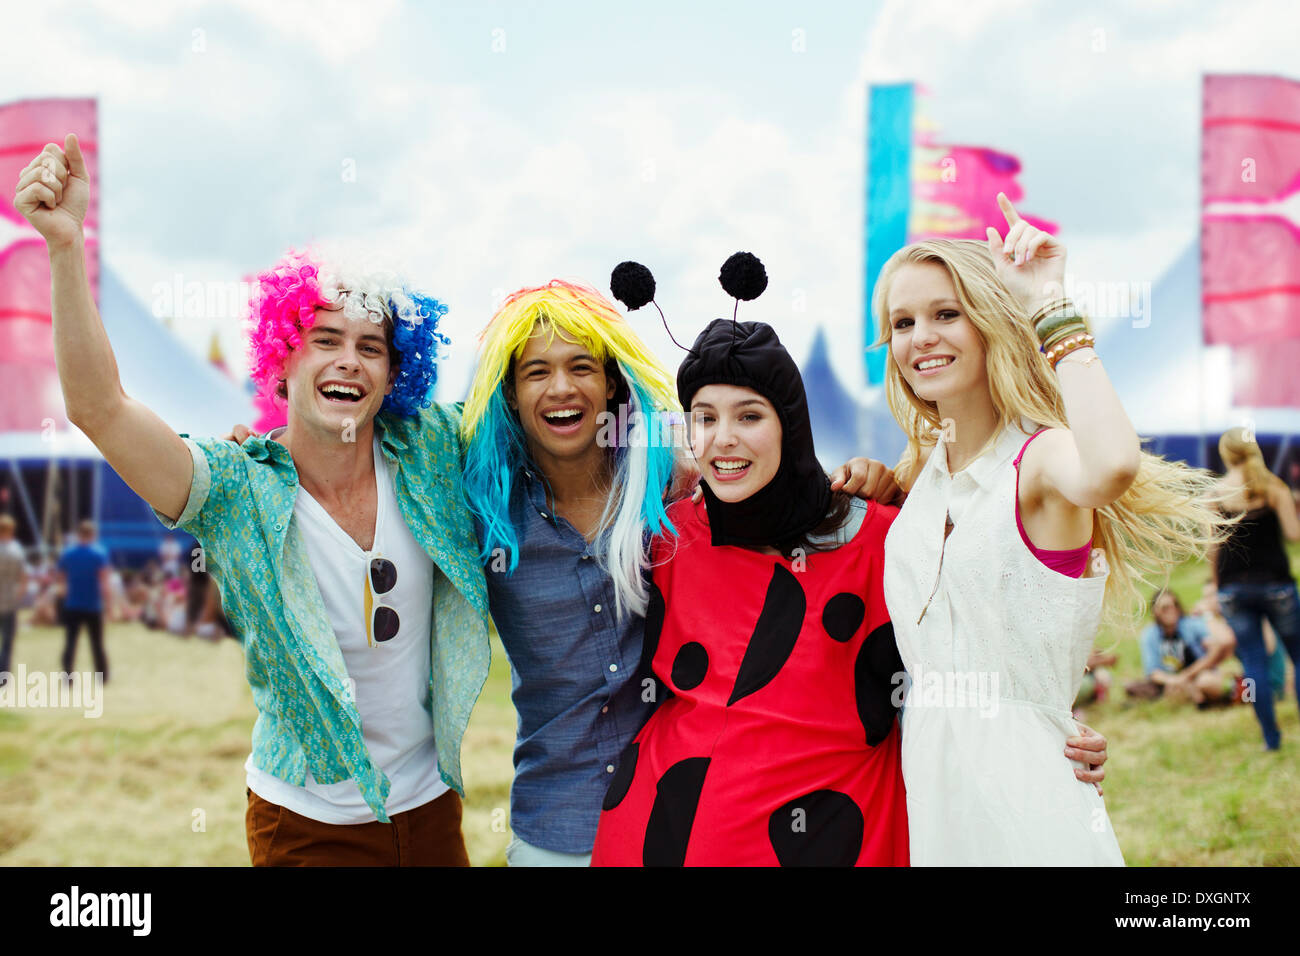 Portrait of friends in costumes at music festival Stock Photo